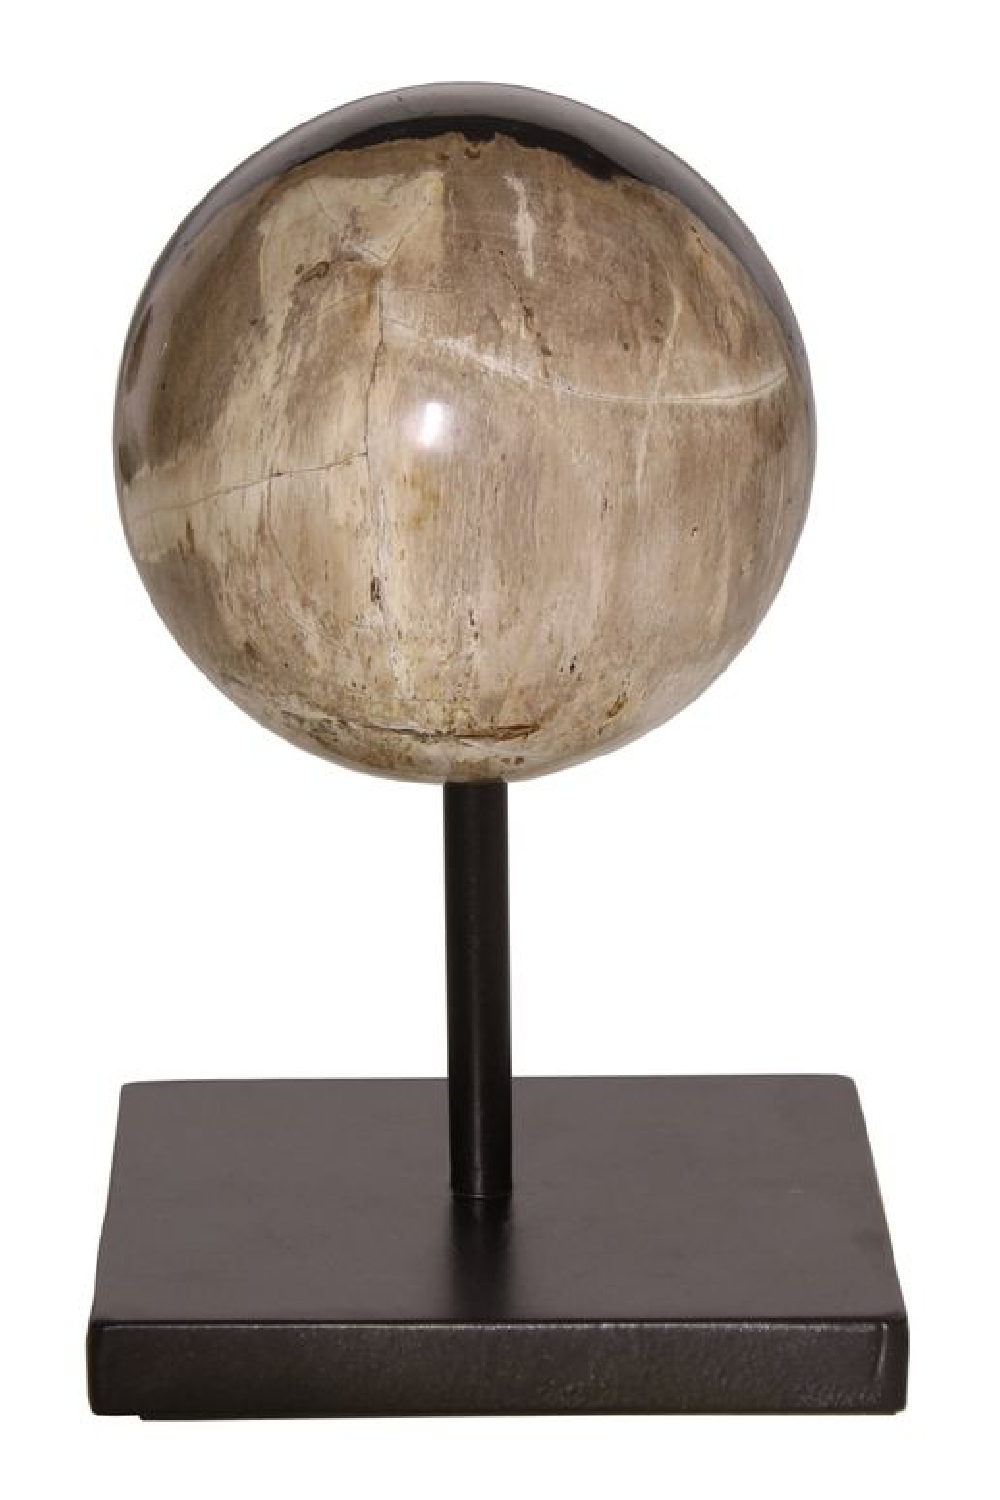 Petrified Wood Sphere On Stand | Andrew Martin | Oroa.com